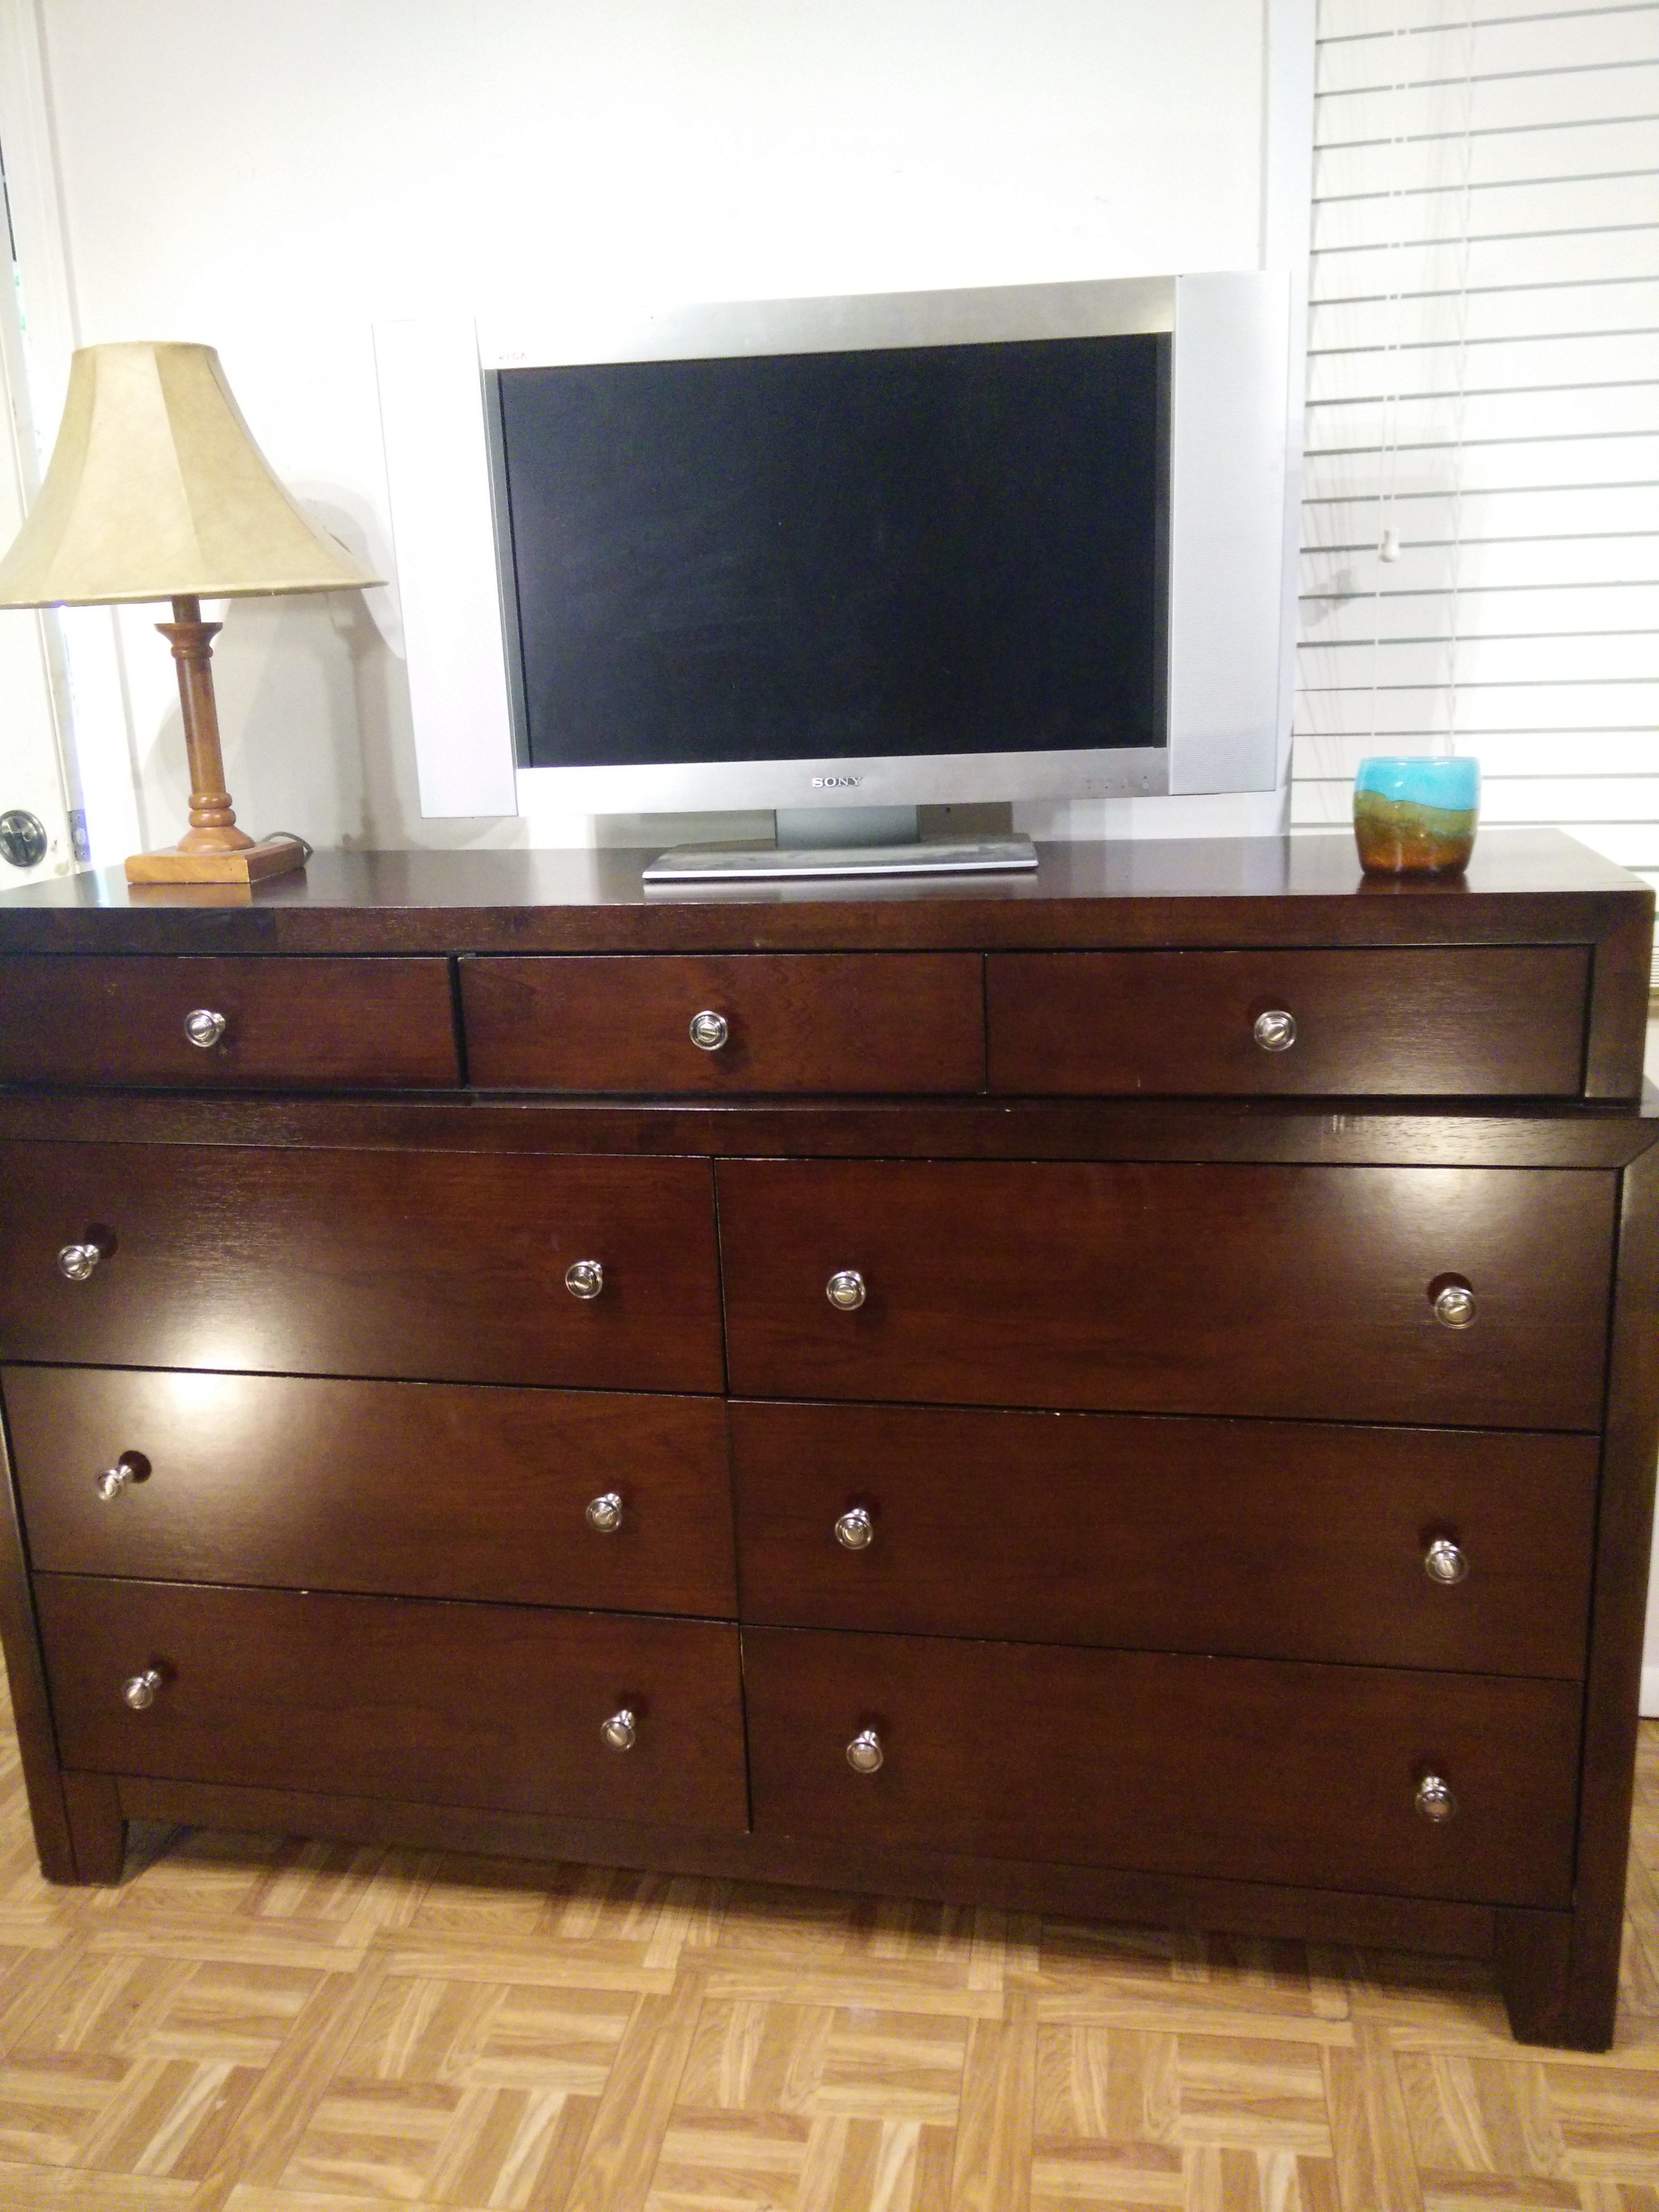 Like new wood dresser/TV stand/buffet with 9 big Drawers in very good condition, all Drawers sliding smoothly